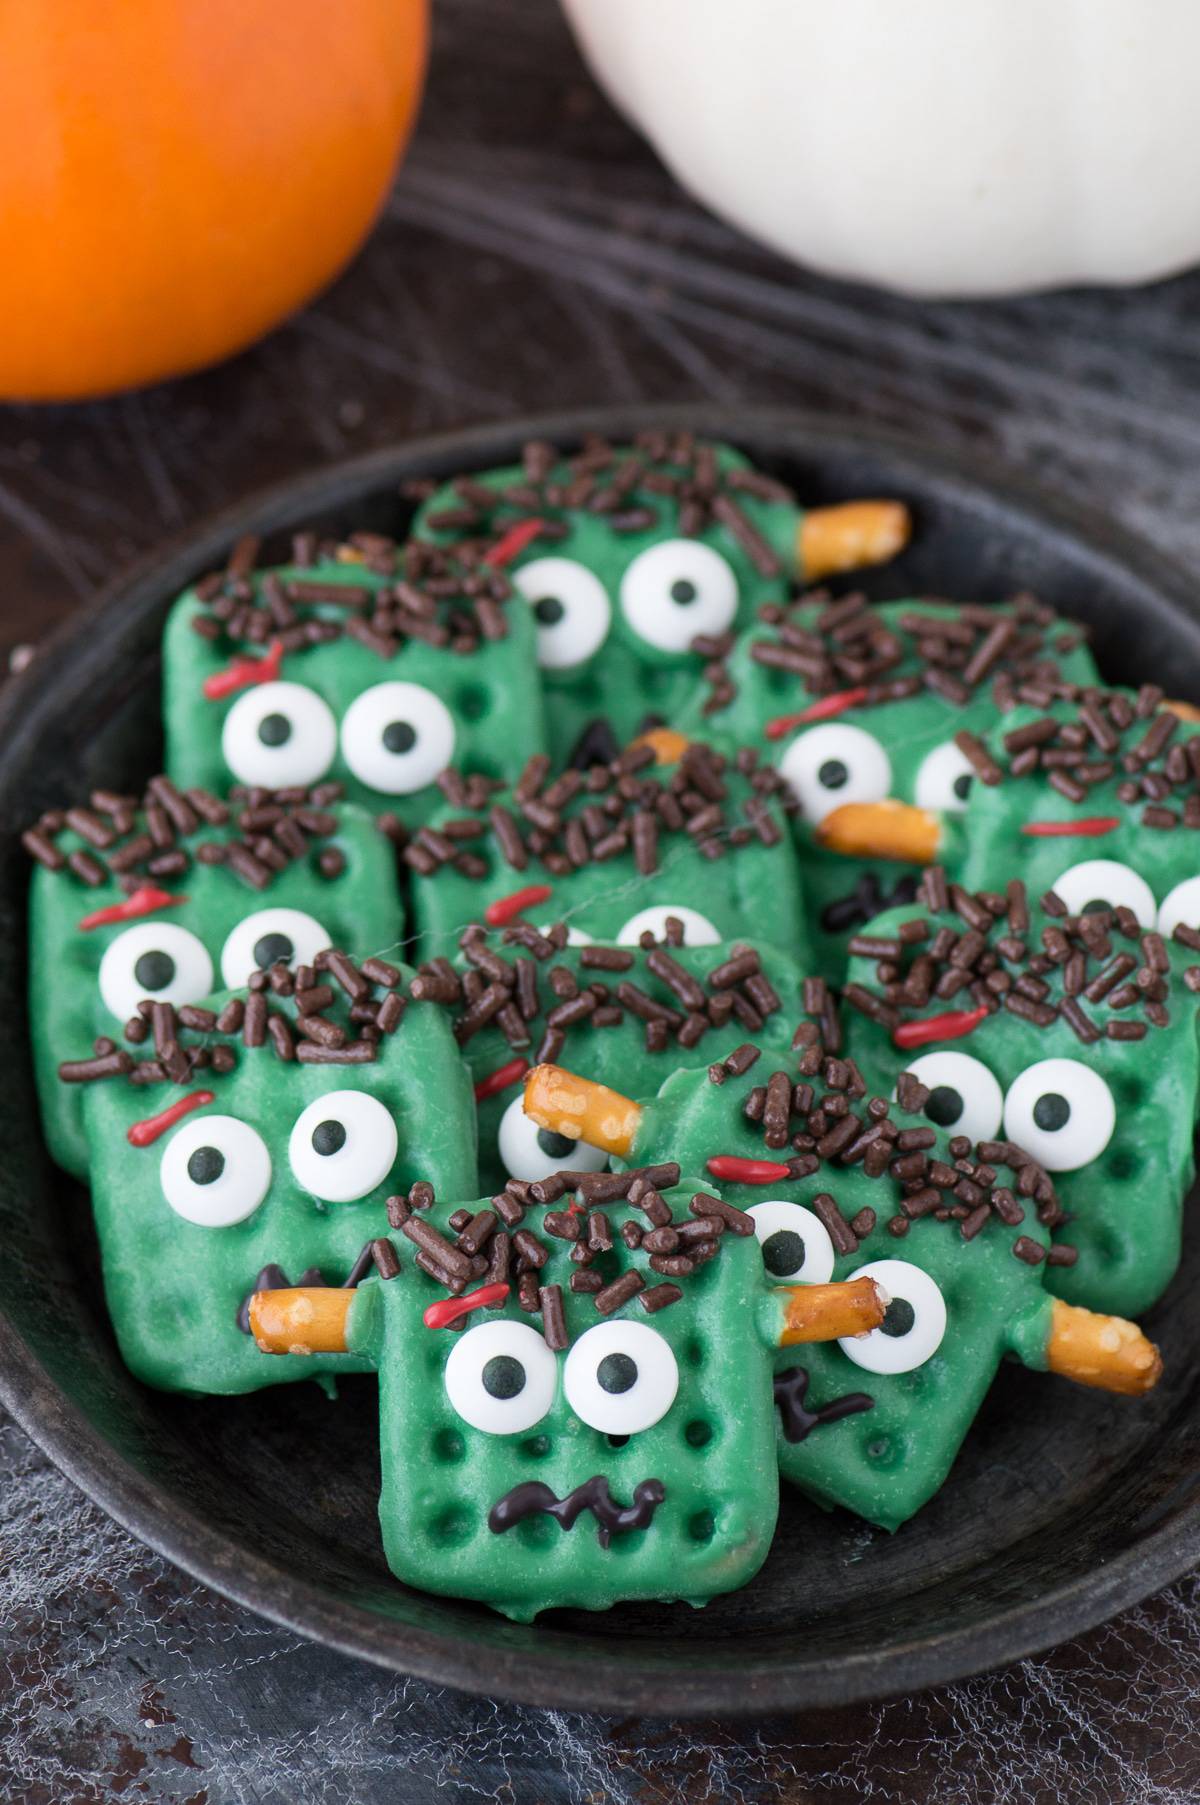 frankenstein treats made out of square waffle pretzels dipped in green chocolate with decorative embellishments on dark plate on dark background